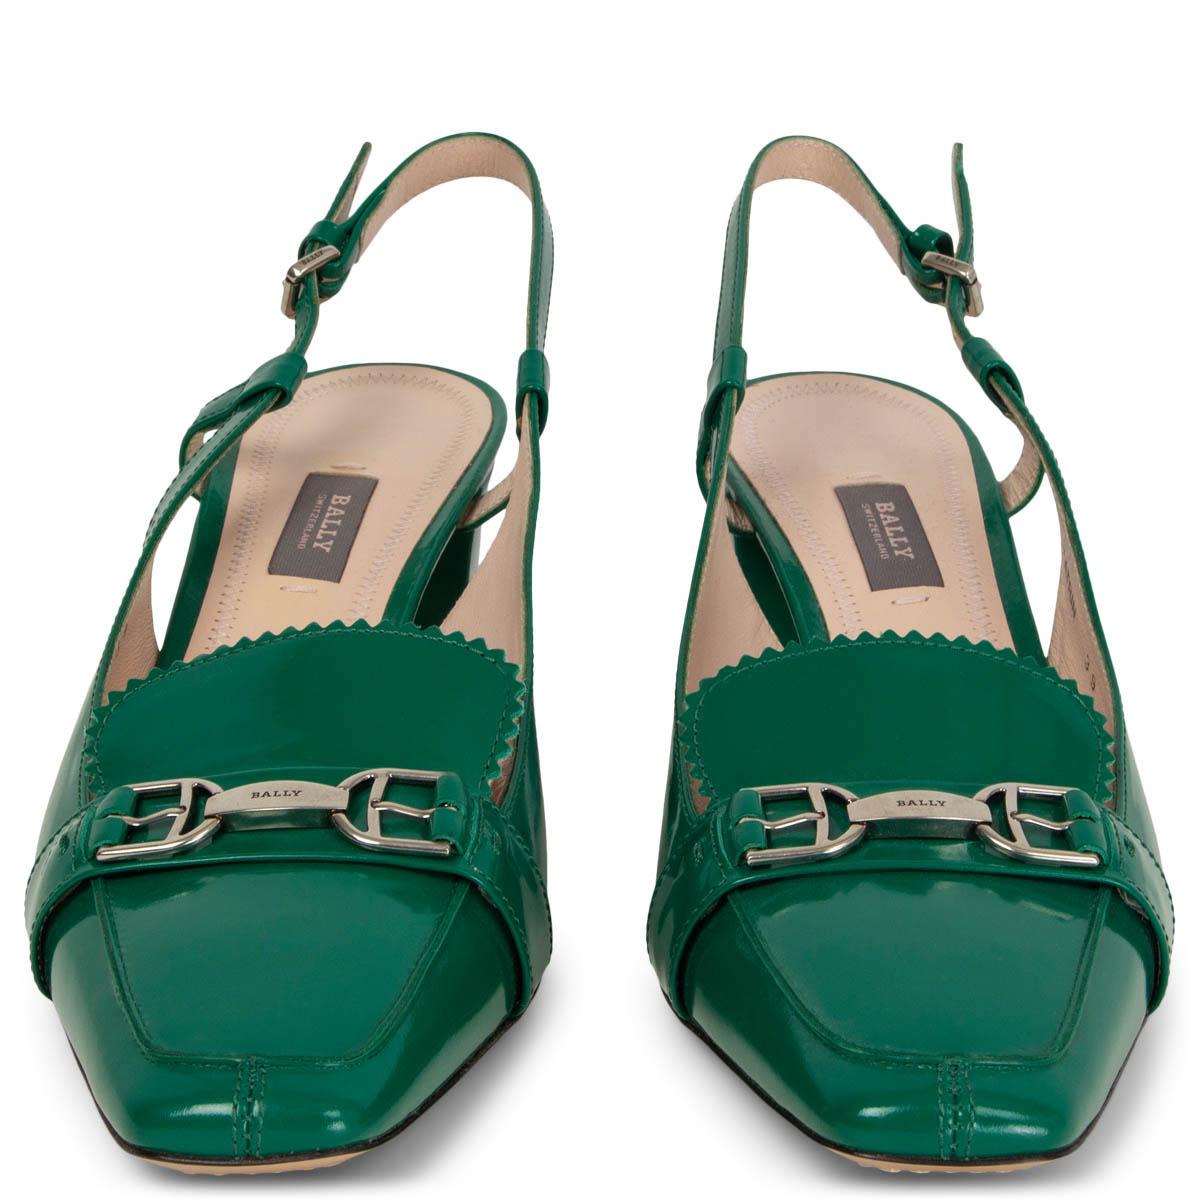 100% authentic Bally slingbacks in emerald green patent leather. They feature a block heel and a silver-tone metal logo detail. Brand new. 

Measurements
Imprinted Size	39
Shoe Size	39
Inside Sole	26cm (10.1in)
Width	8cm (3.1in)
Heel	6cm